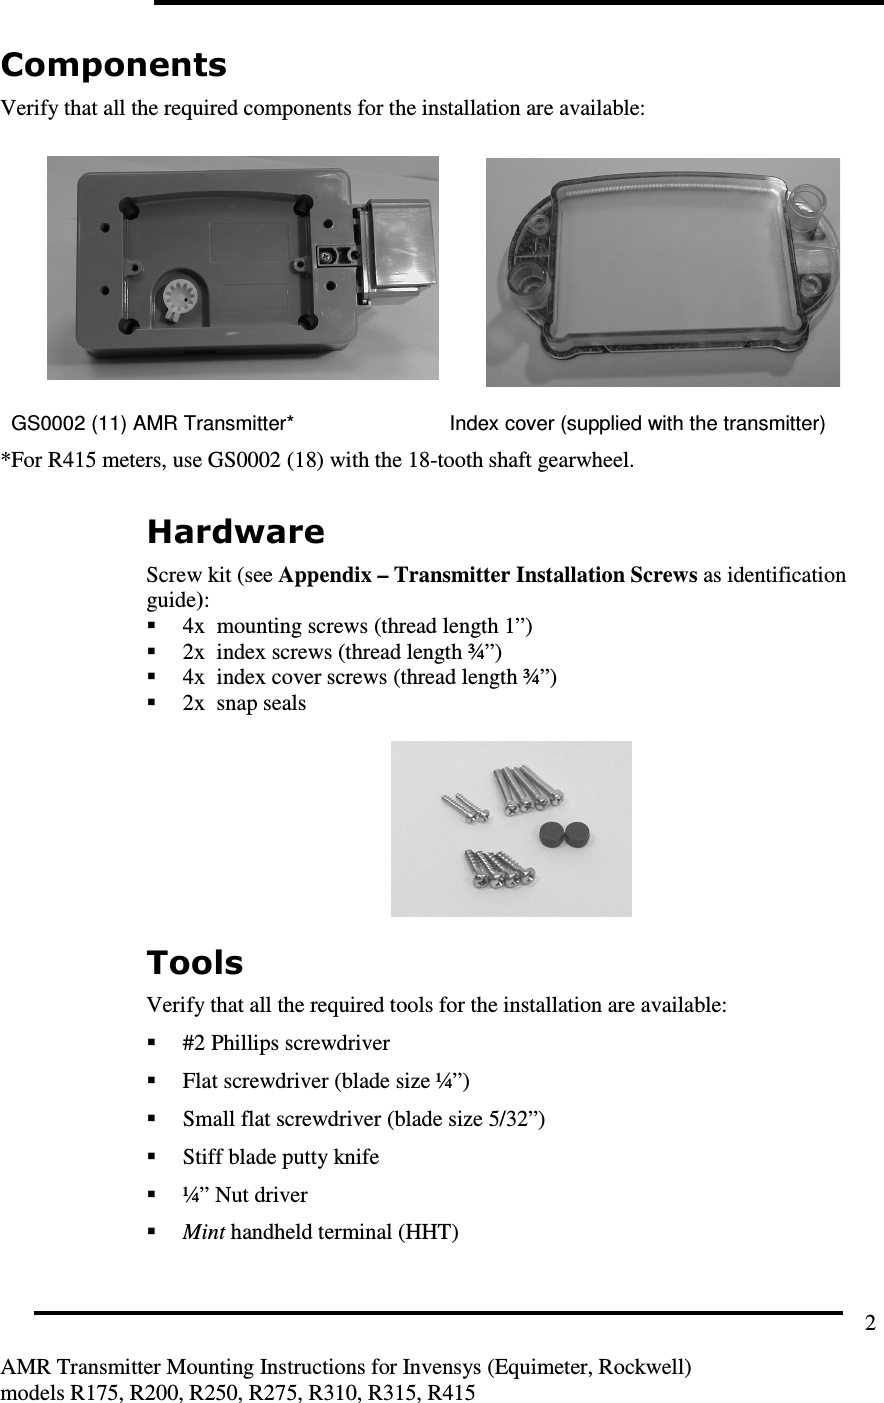         AMR Transmitter Mounting Instructions for Invensys (Equimeter, Rockwell) models R175, R200, R250, R275, R310, R315, R415 2 Components Verify that all the required components for the installation are available:    GS0002 (11) AMR Transmitter*  Index cover (supplied with the transmitter) *For R415 meters, use GS0002 (18) with the 18-tooth shaft gearwheel.  Hardware Screw kit (see Appendix – Transmitter Installation Screws as identification guide):  4x  mounting screws (thread length 1”)  2x  index screws (thread length ¾”)  4x  index cover screws (thread length ¾”)  2x  snap seals   Tools Verify that all the required tools for the installation are available:  #2 Phillips screwdriver  Flat screwdriver (blade size ¼”)  Small flat screwdriver (blade size 5/32”)  Stiff blade putty knife  ¼” Nut driver  Mint handheld terminal (HHT)  